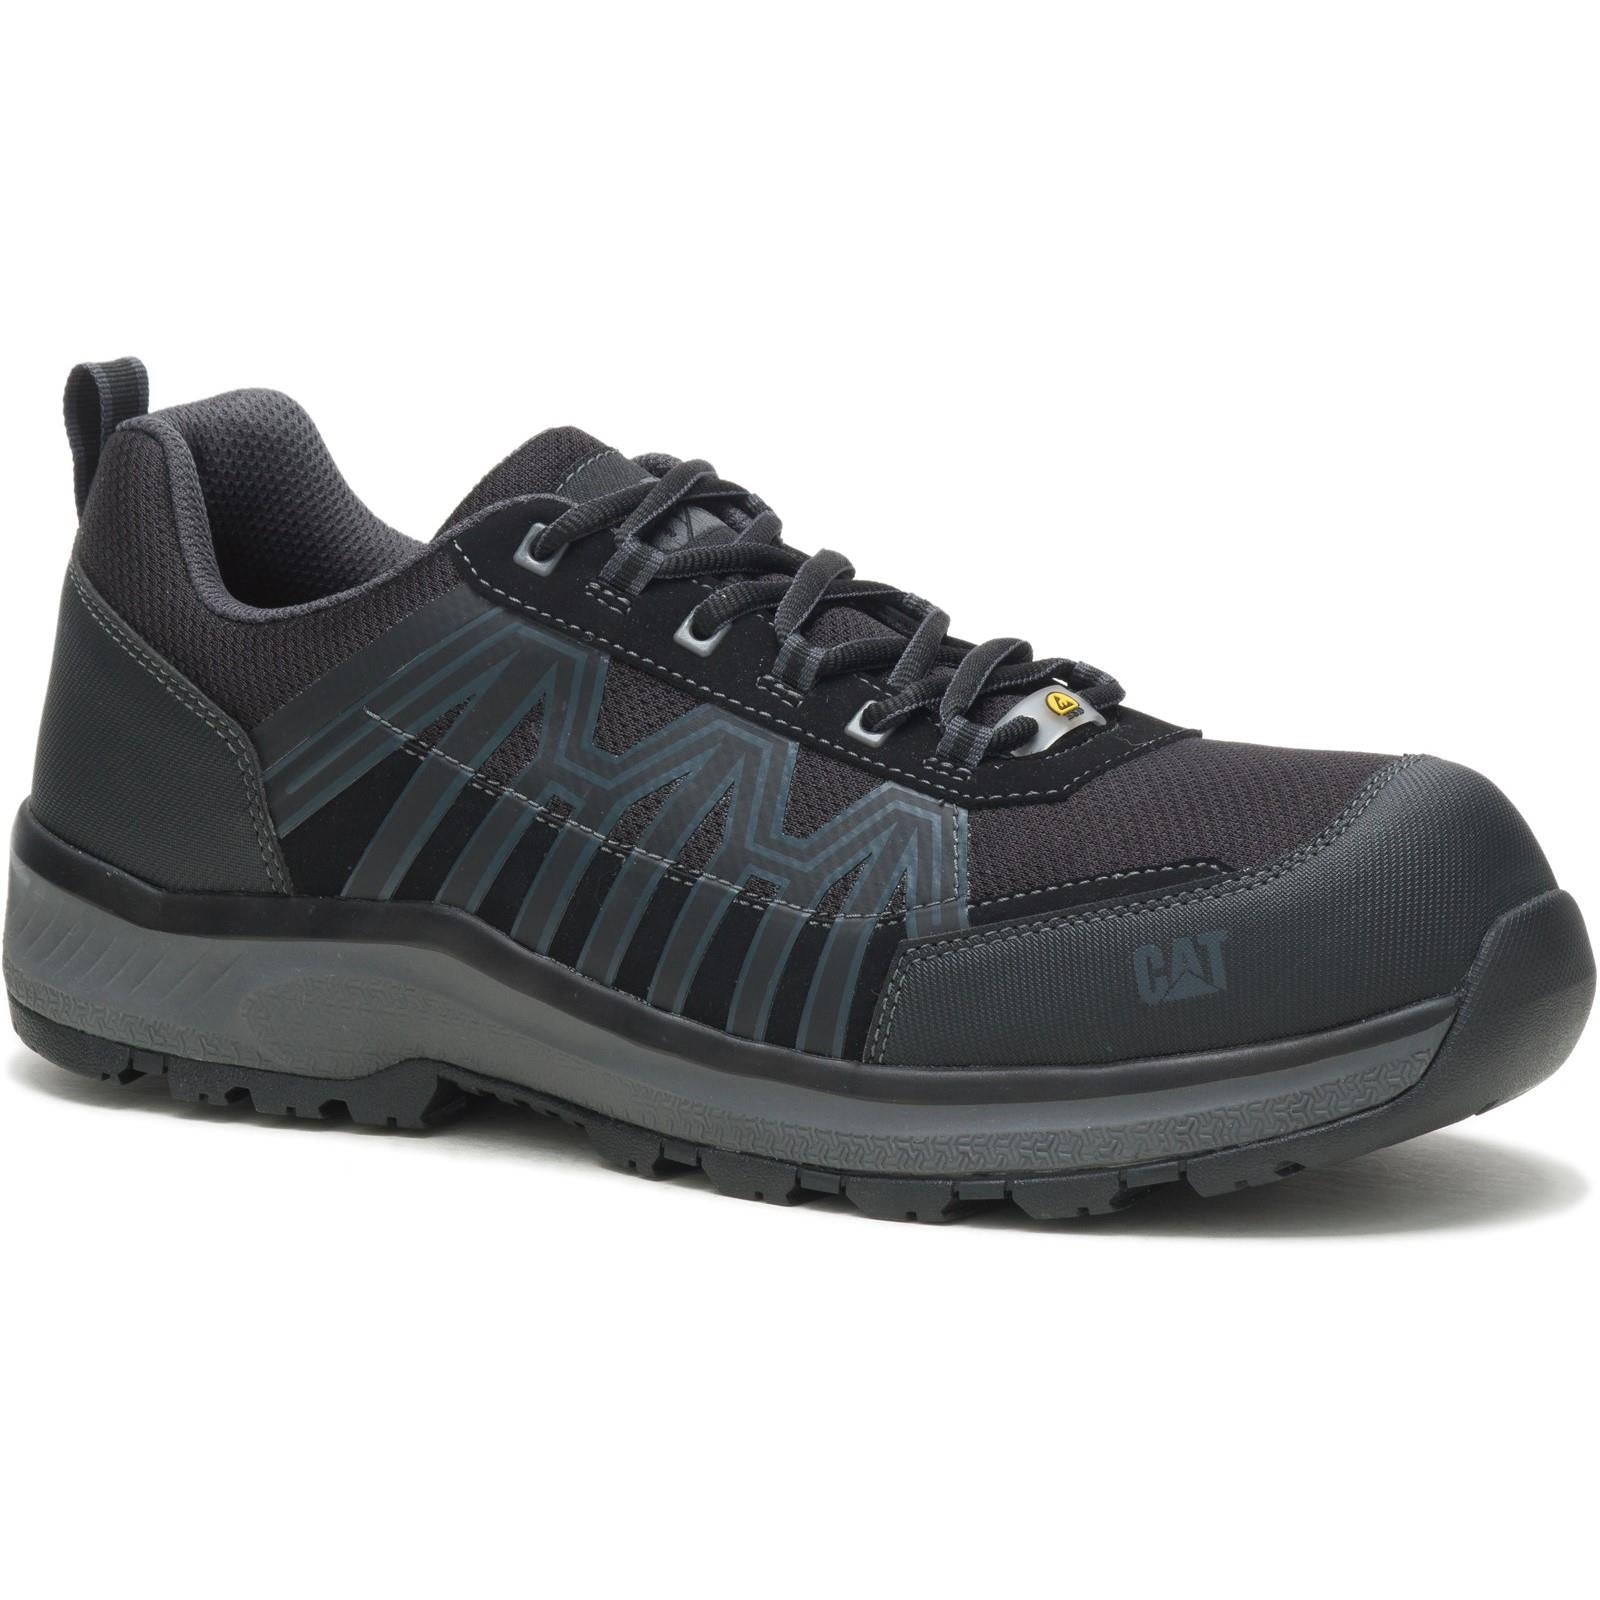 Caterpillar CAT Charge S3 black composite toe/midsole work safety trainers shoes